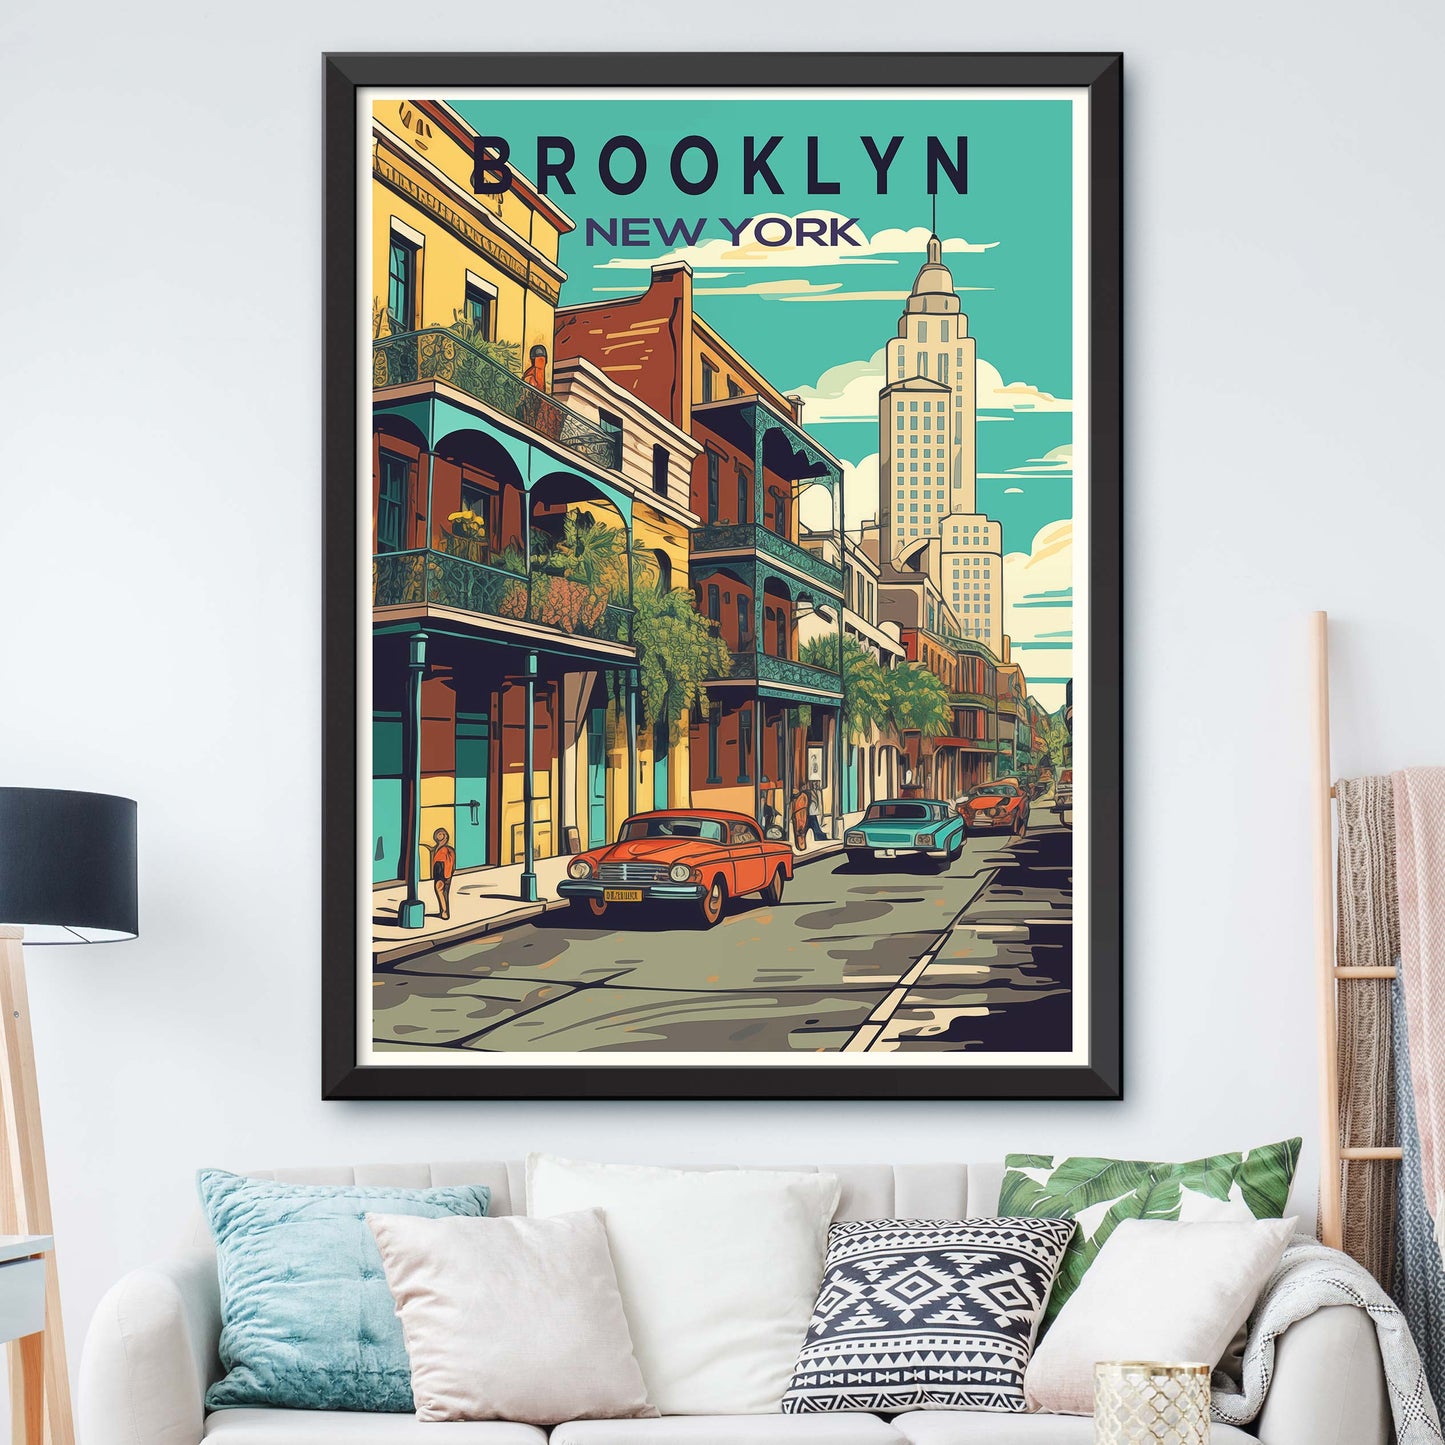 Brooklyn Perspectives: A Tribute to New York's Borough